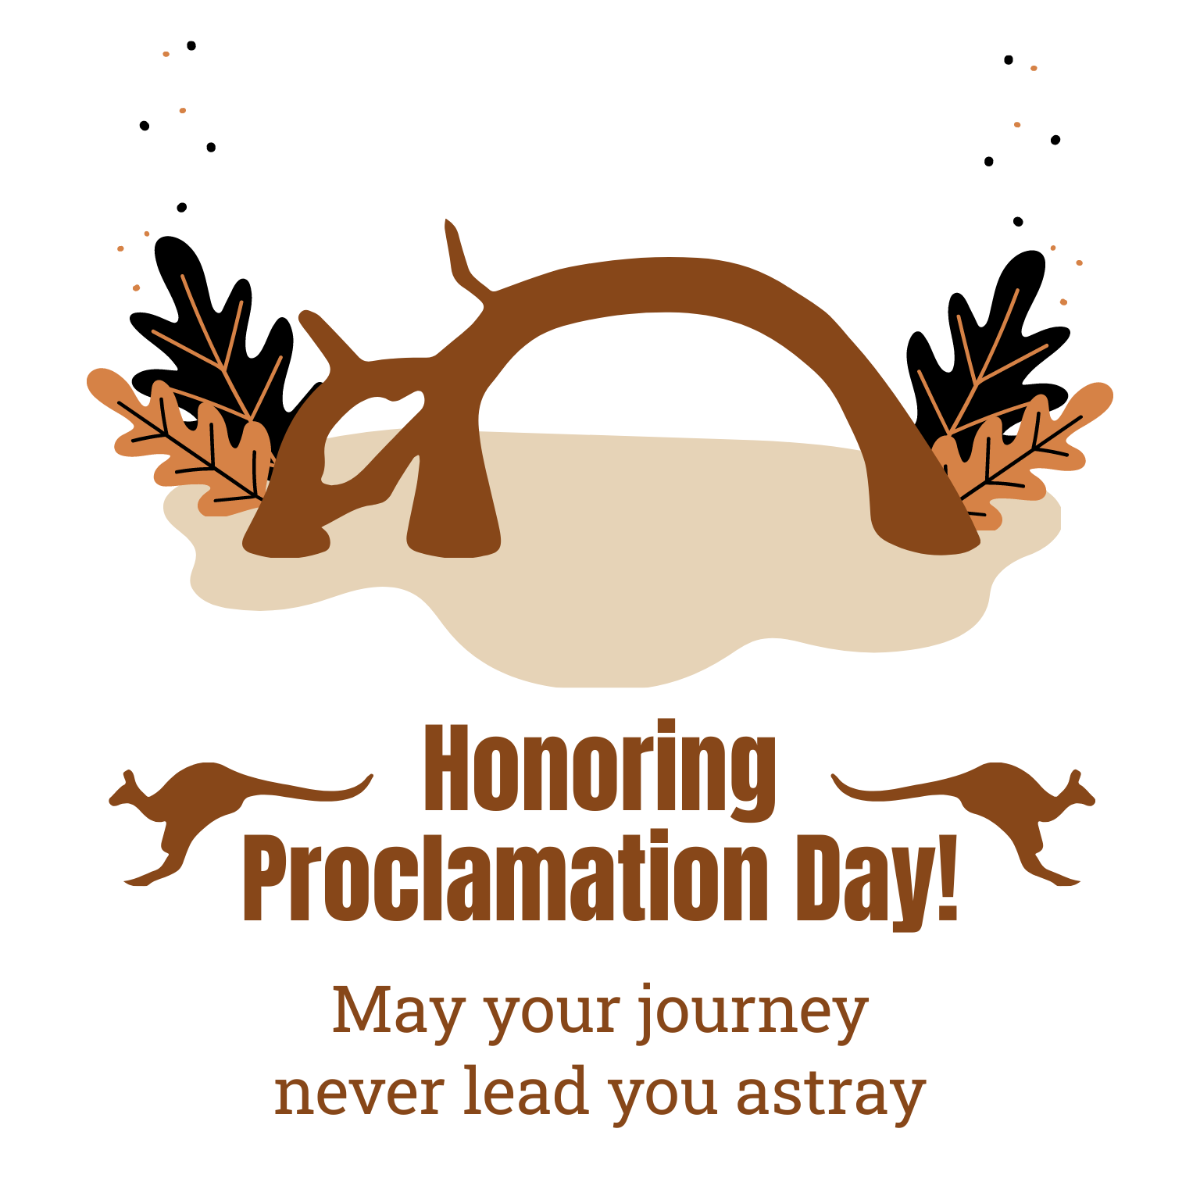 Free Proclamation Day Wishes Vector Template